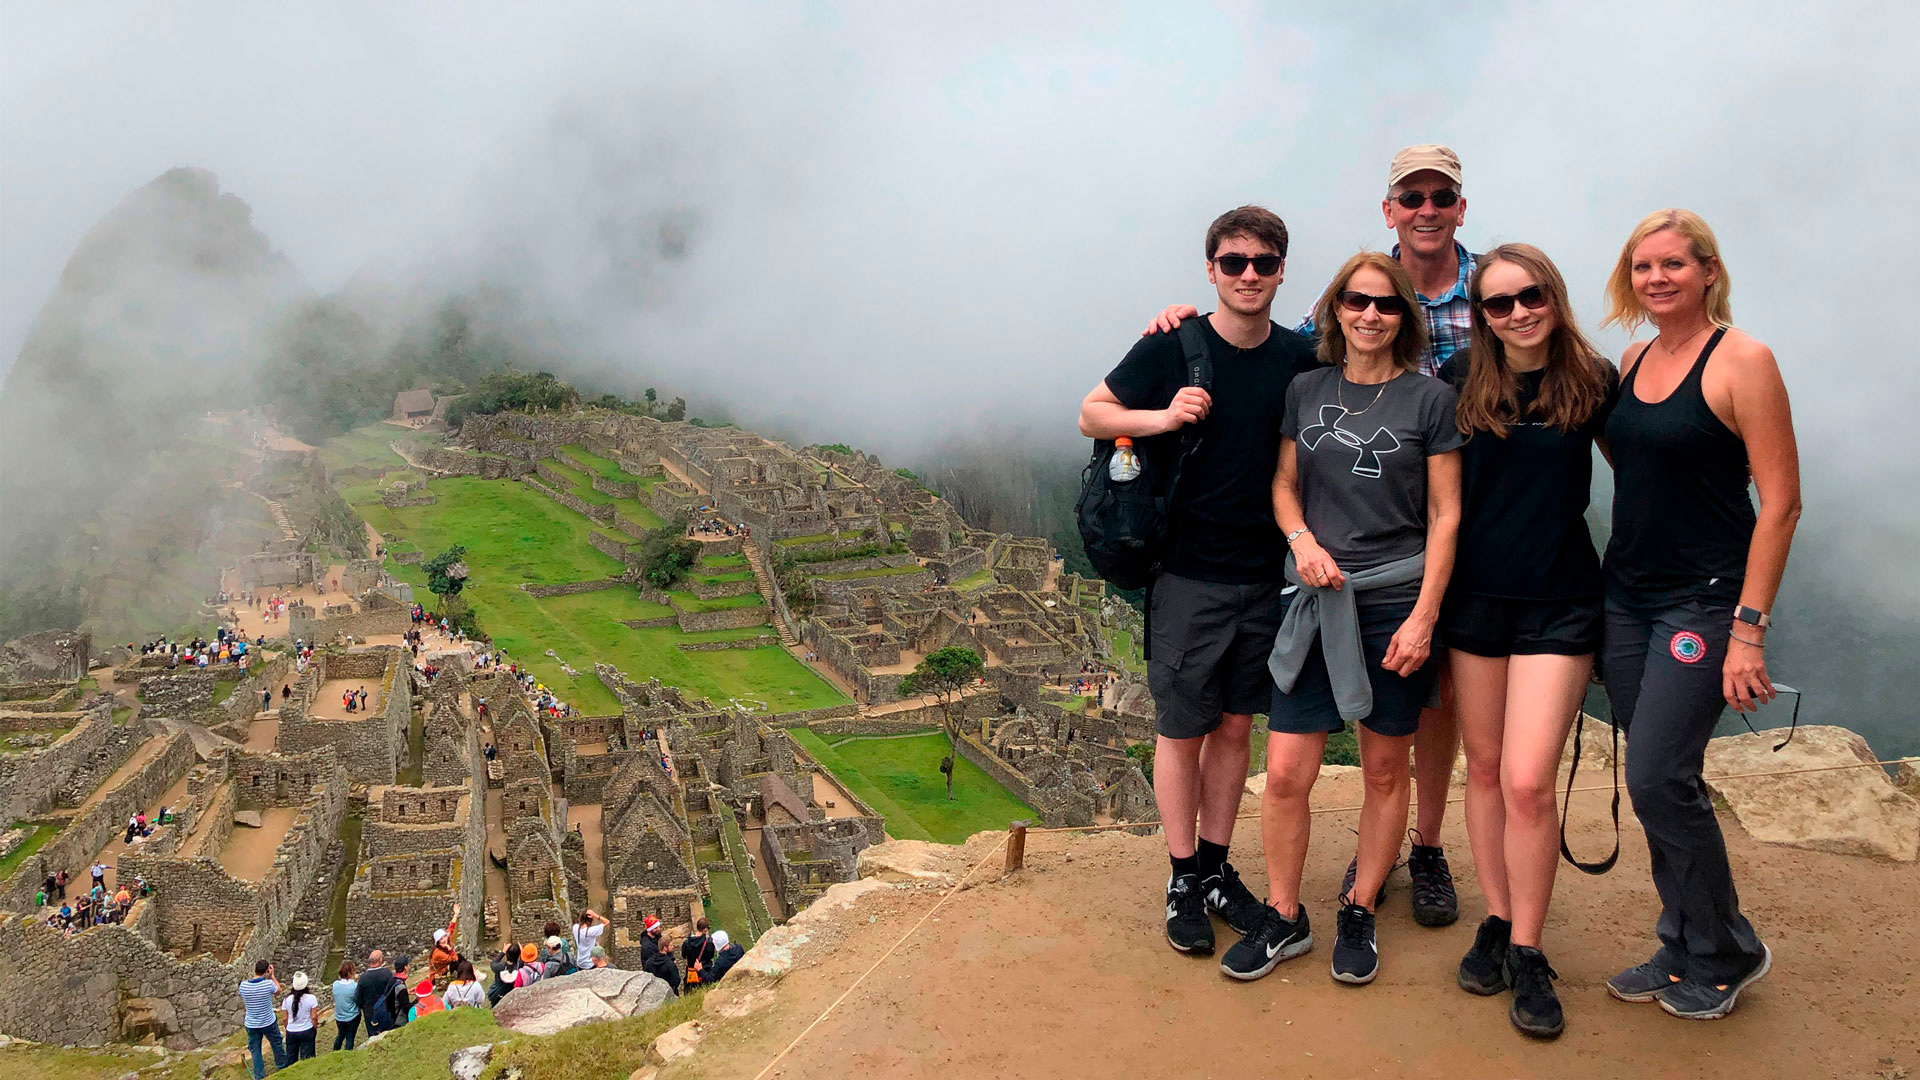 Peter Wilson and family explore Machu Picchu in the cloud